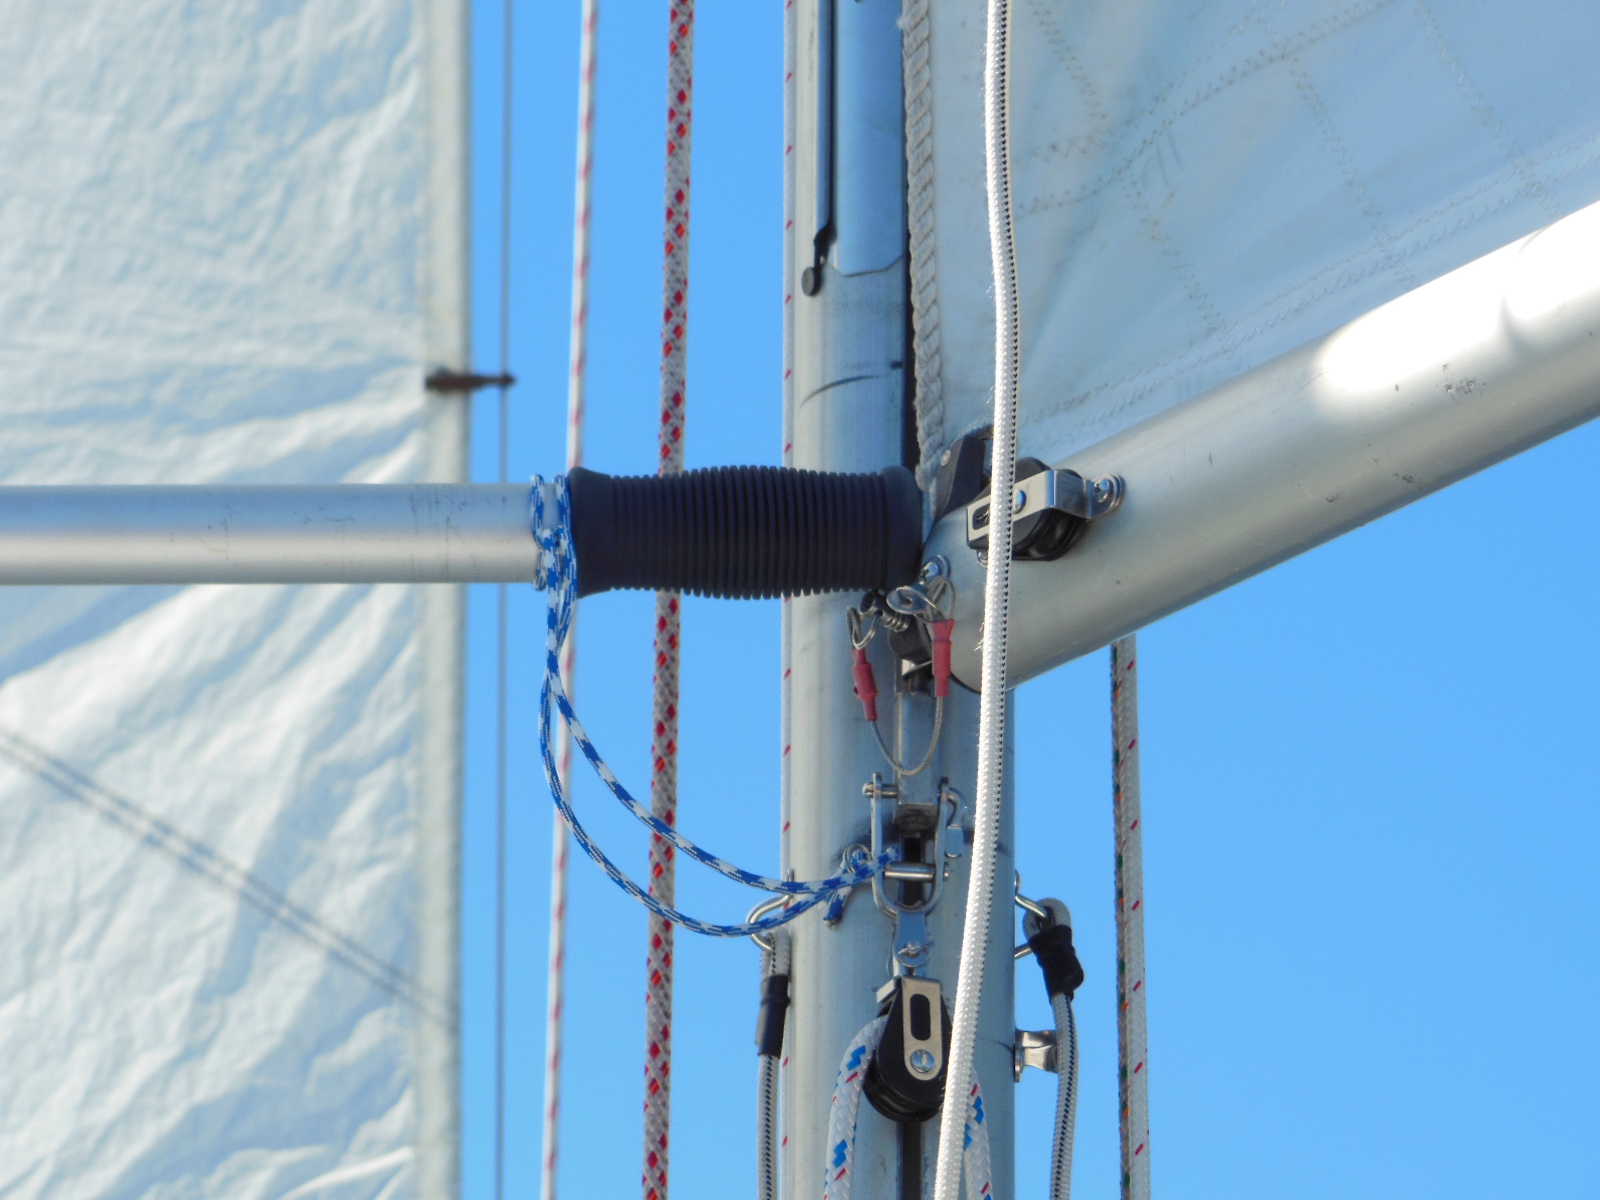 Sailors, how do you “tie off” a spool of string? : r/sailing